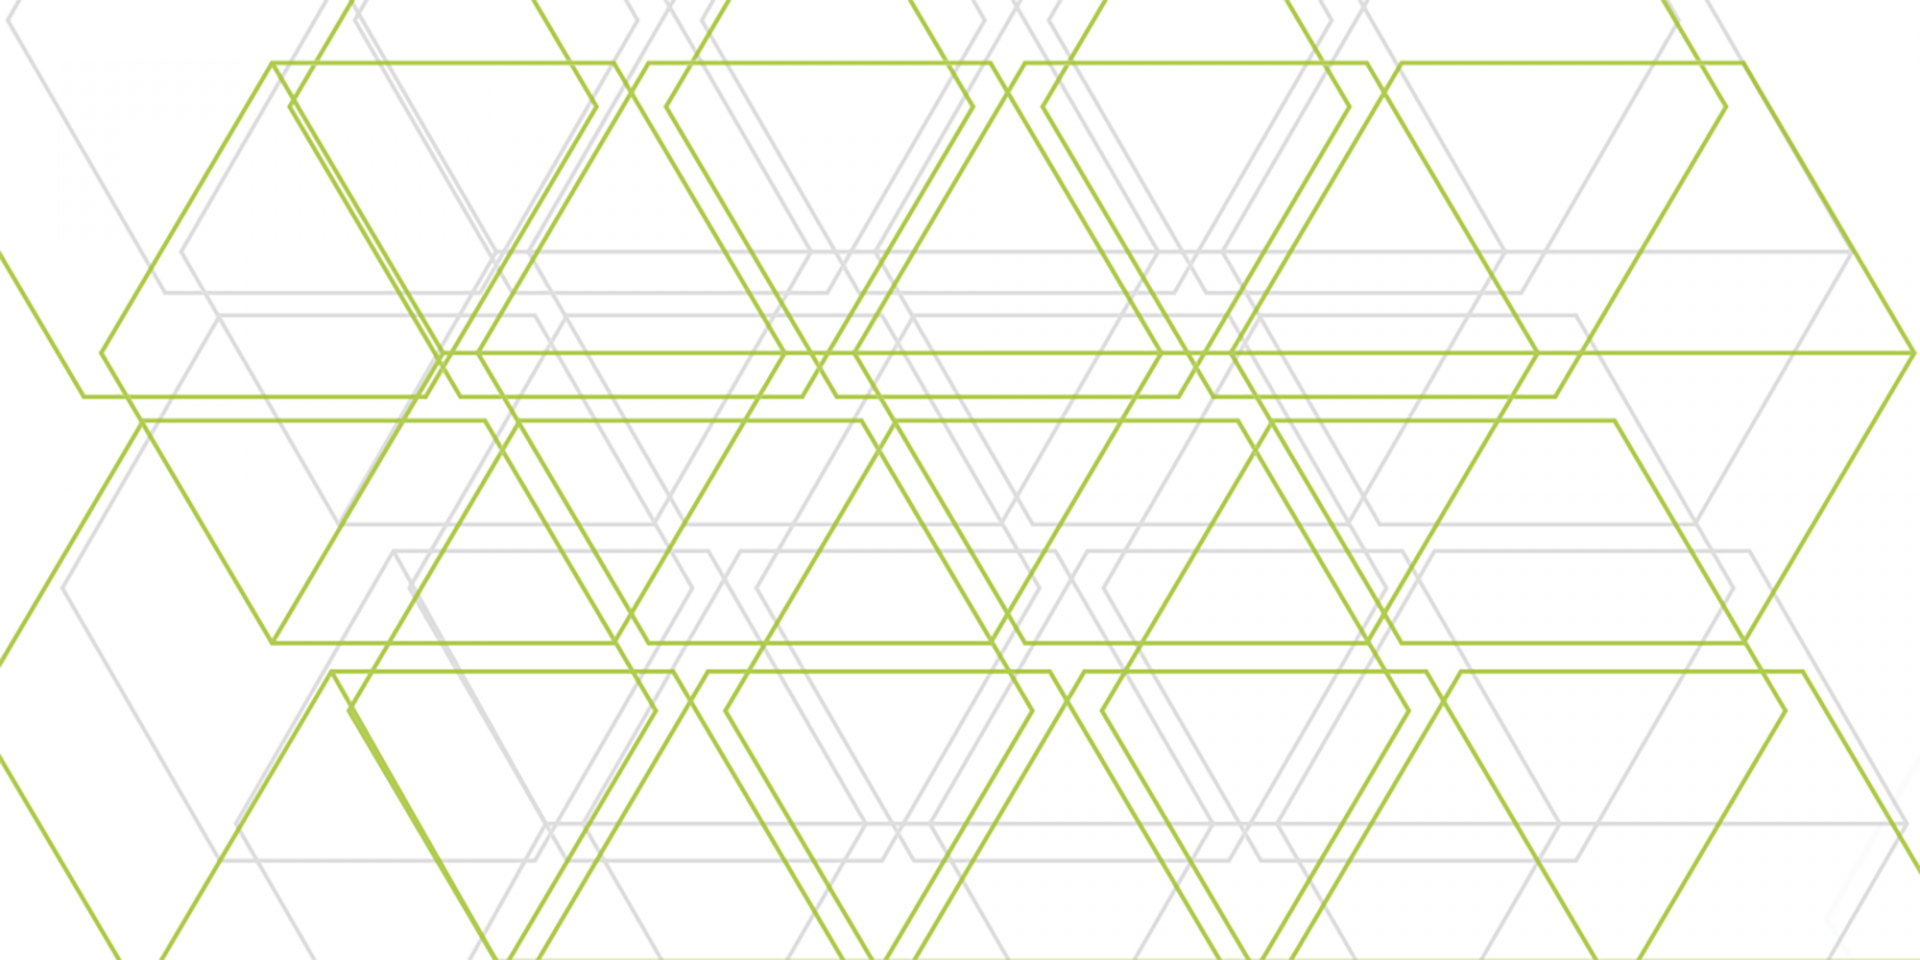 graphic illustration with green and grey interlocking triangular shapes